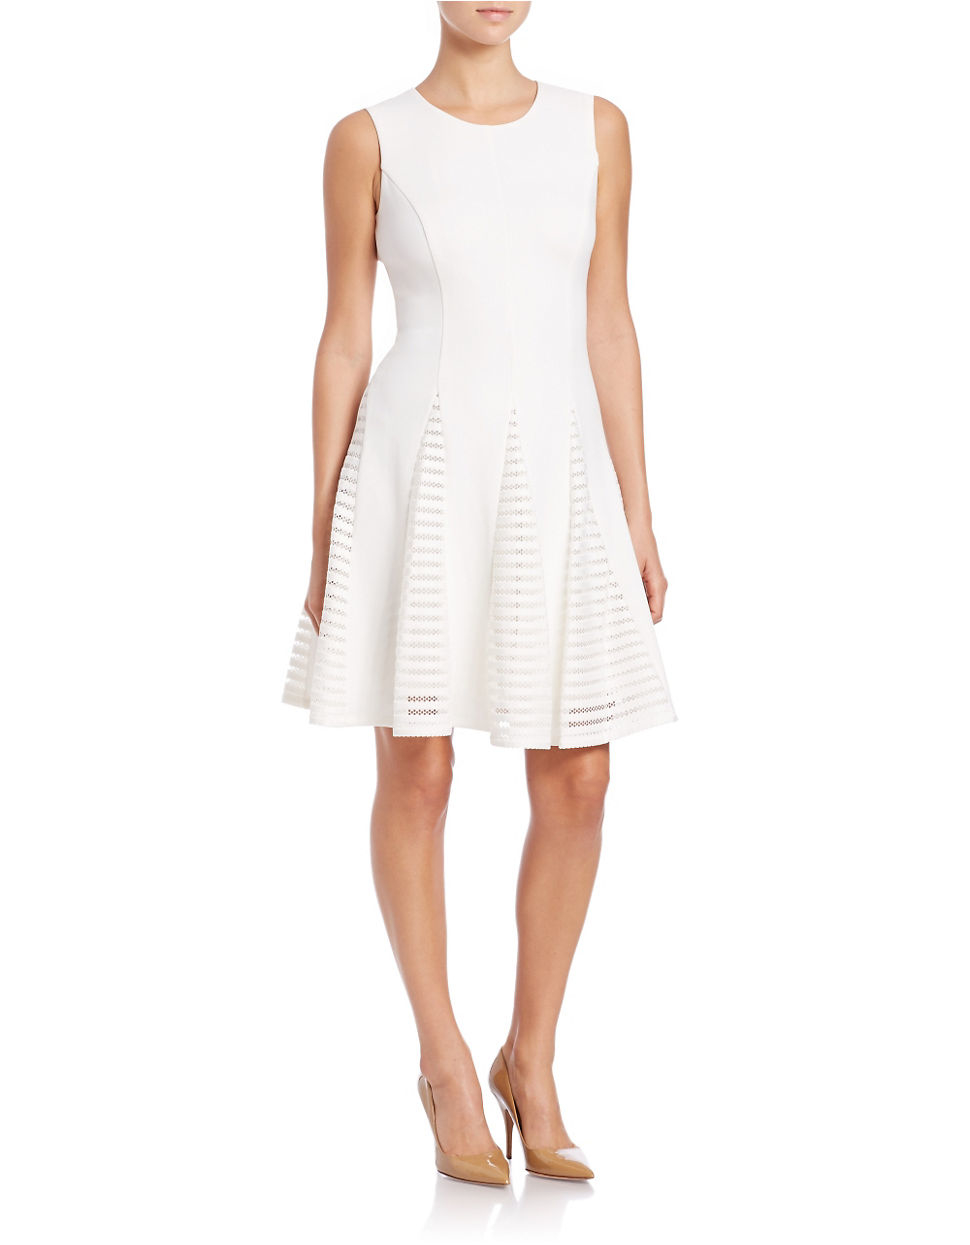 Lyst - Calvin Klein Pleated Fit And Flare Dress in White